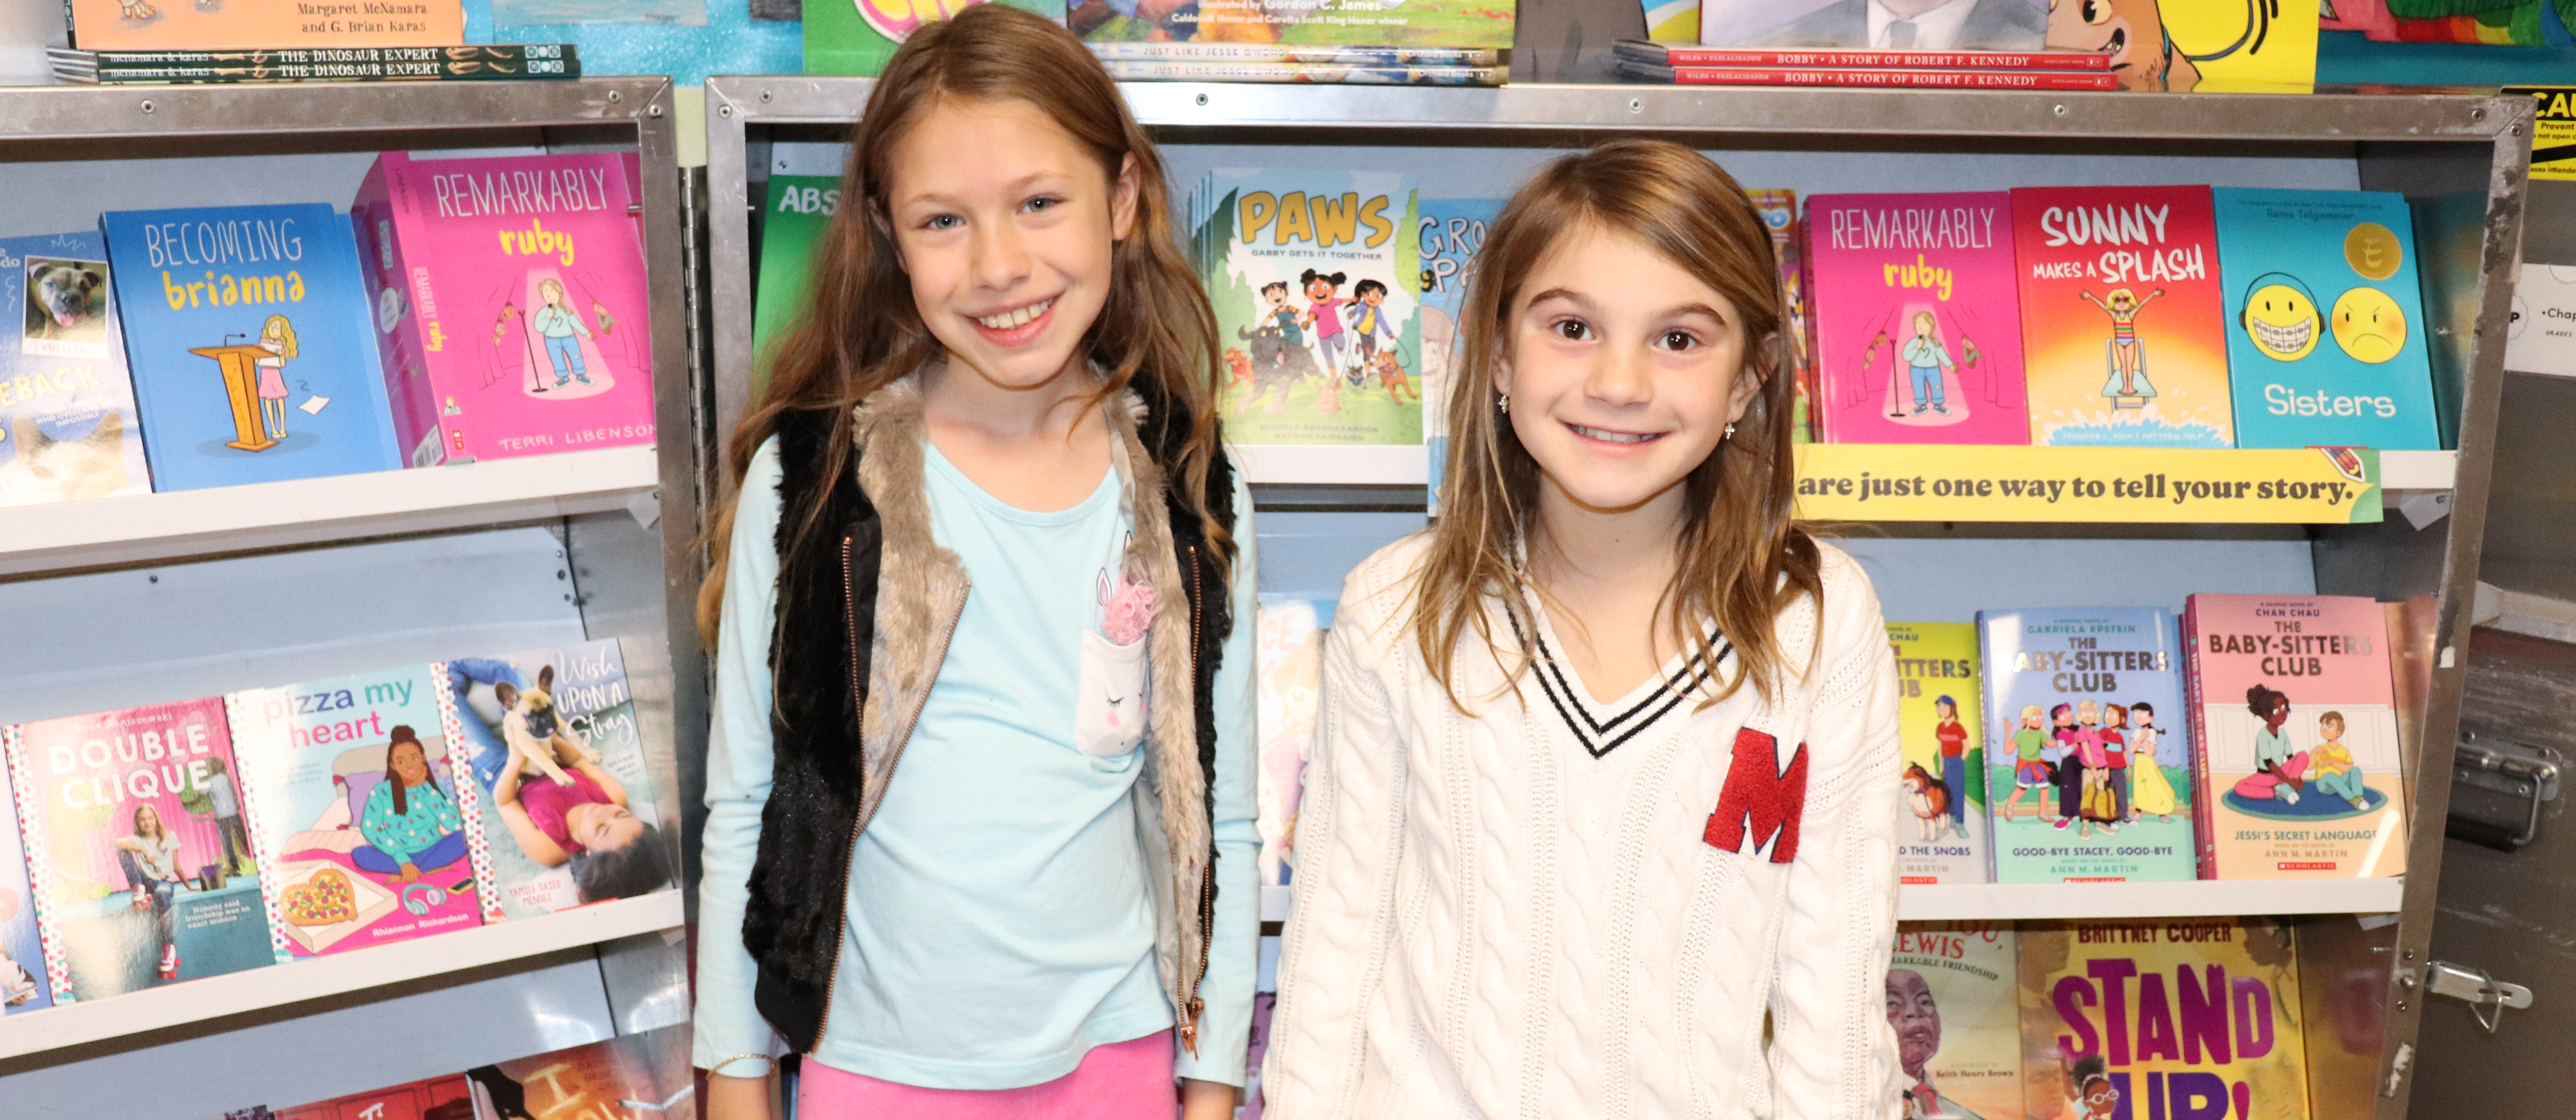 Two girls standing in front of a book display